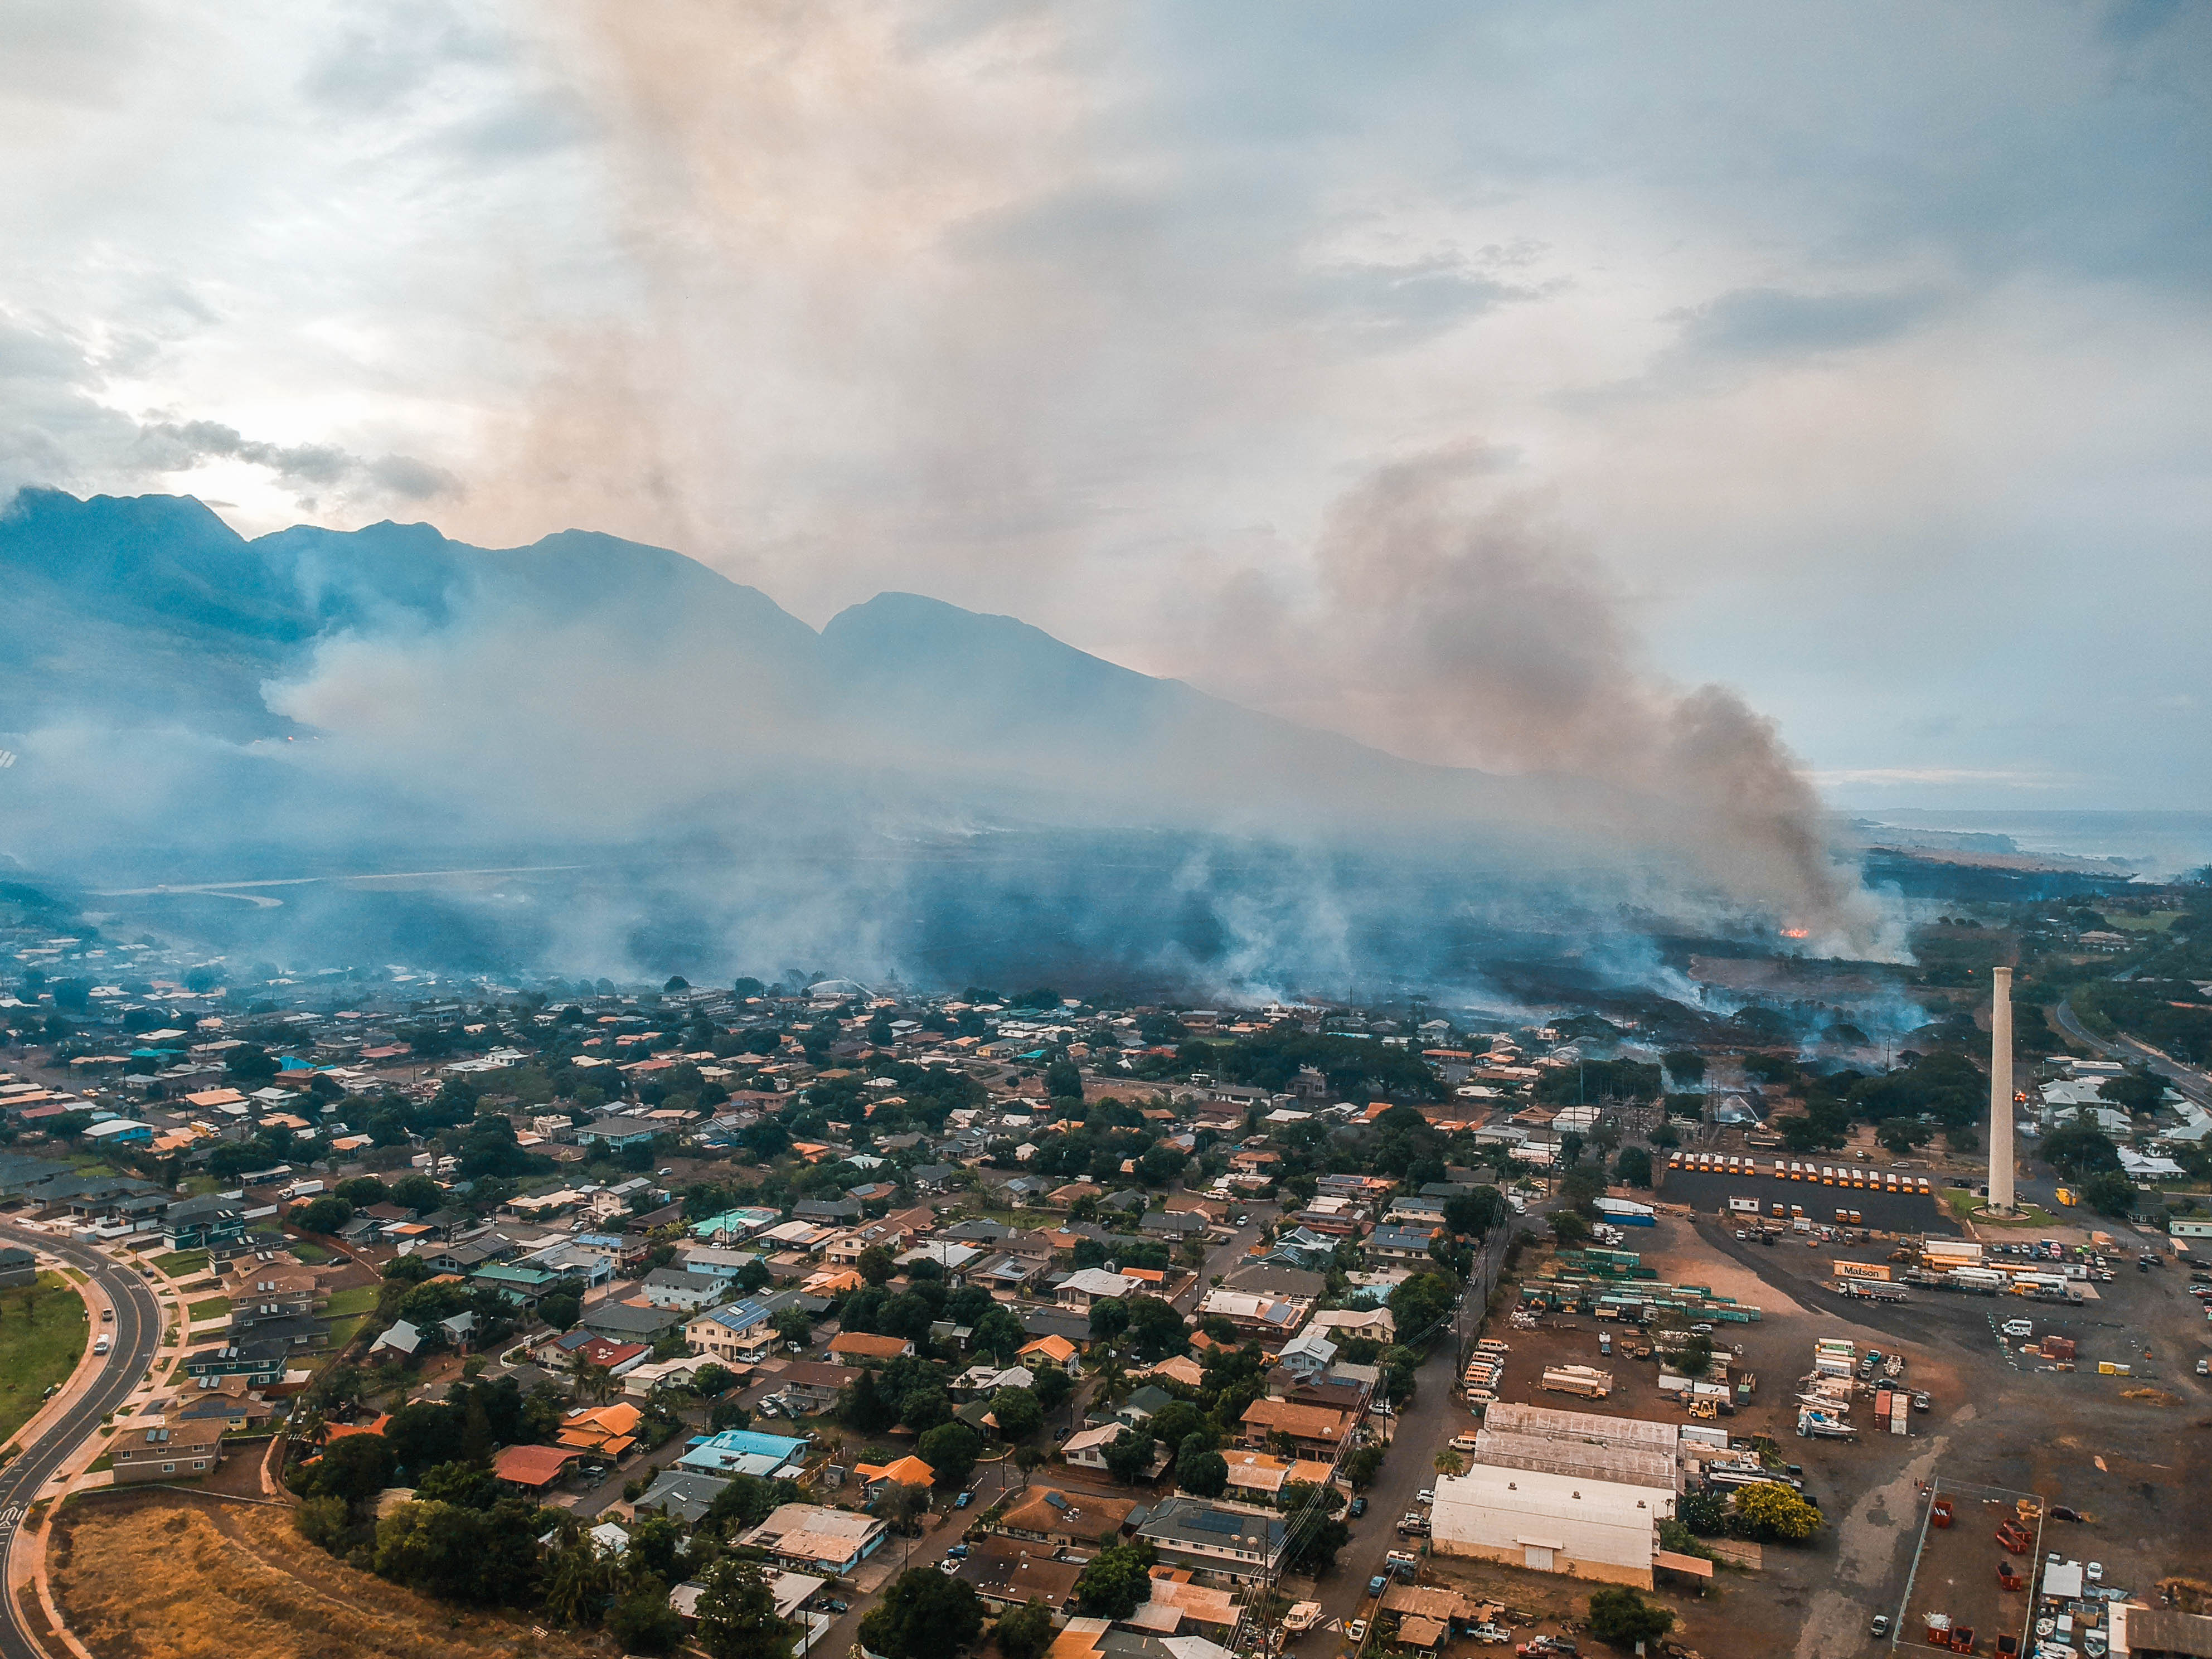 Bishop Larry Silva on the Maui Fires (Morning Air)